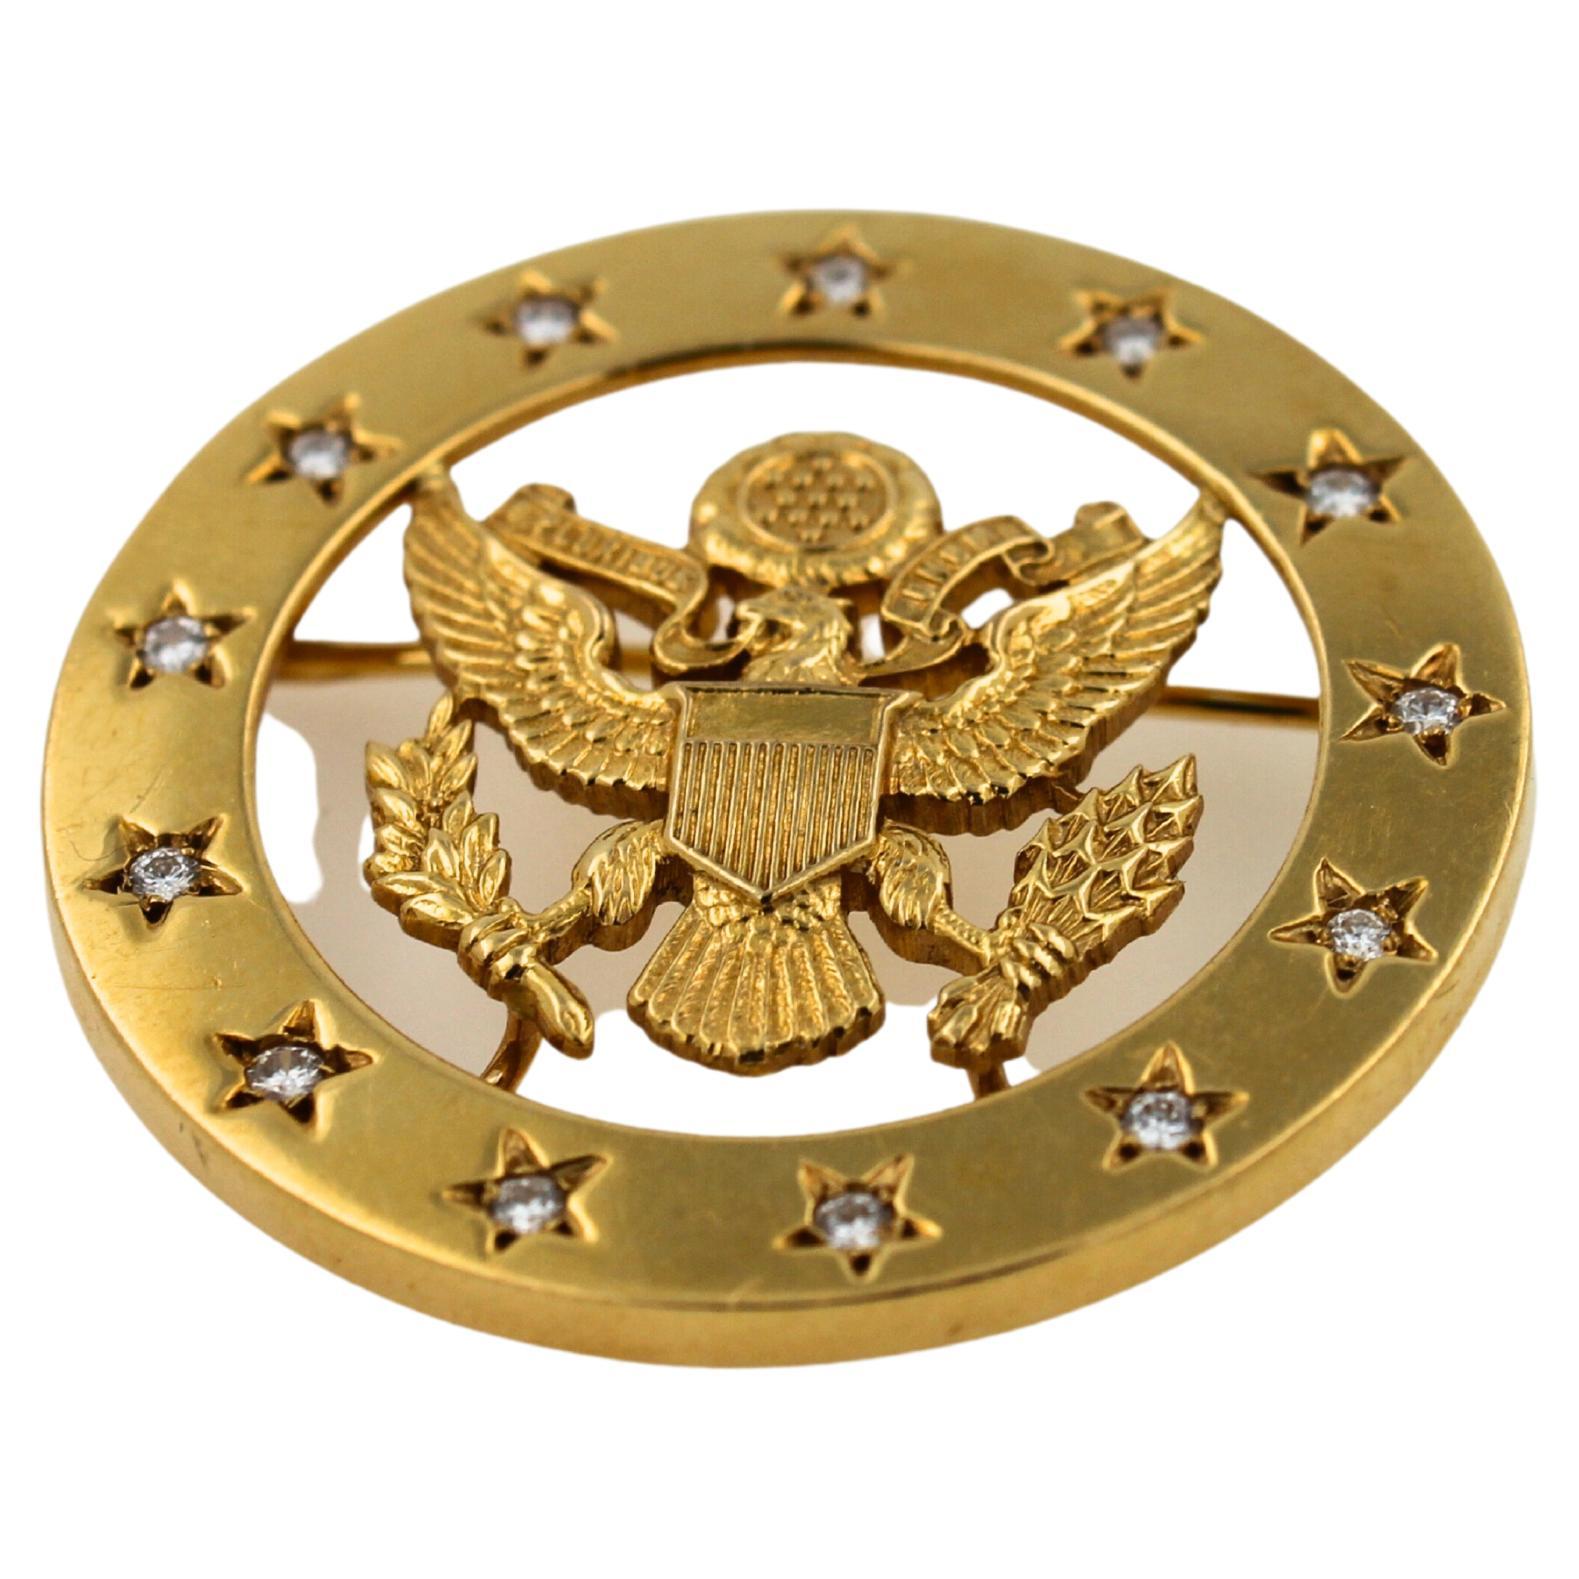 Vintage USA American Bald Eagle Stars 18 Karat Yellow Gold Brooch Clip Pin Badge
Vintage/Estate Item 
Approximate Year Range of Creation - 1960s-1990s
18K Solid Yellow Gold 
35mm in Diameter
13.30 Grams 
Very Beautiful, High-End Finish with Amazing